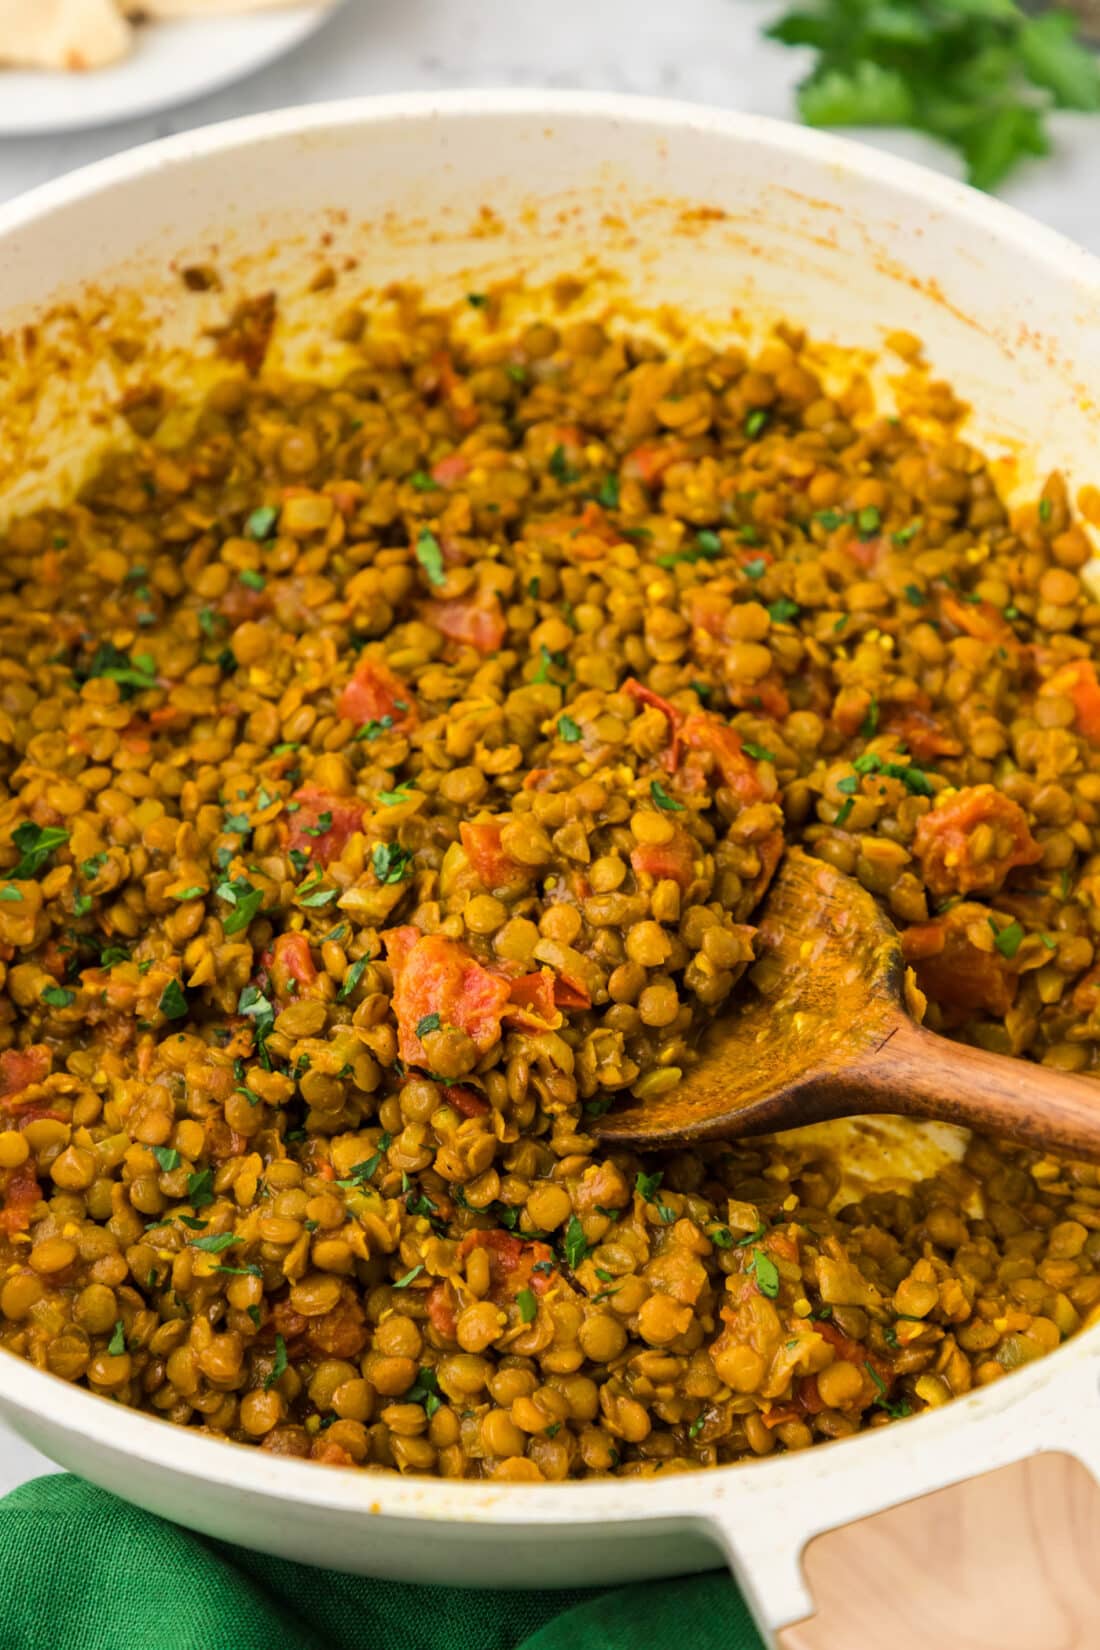 Skillet of Lentil Curry with a spoon in it